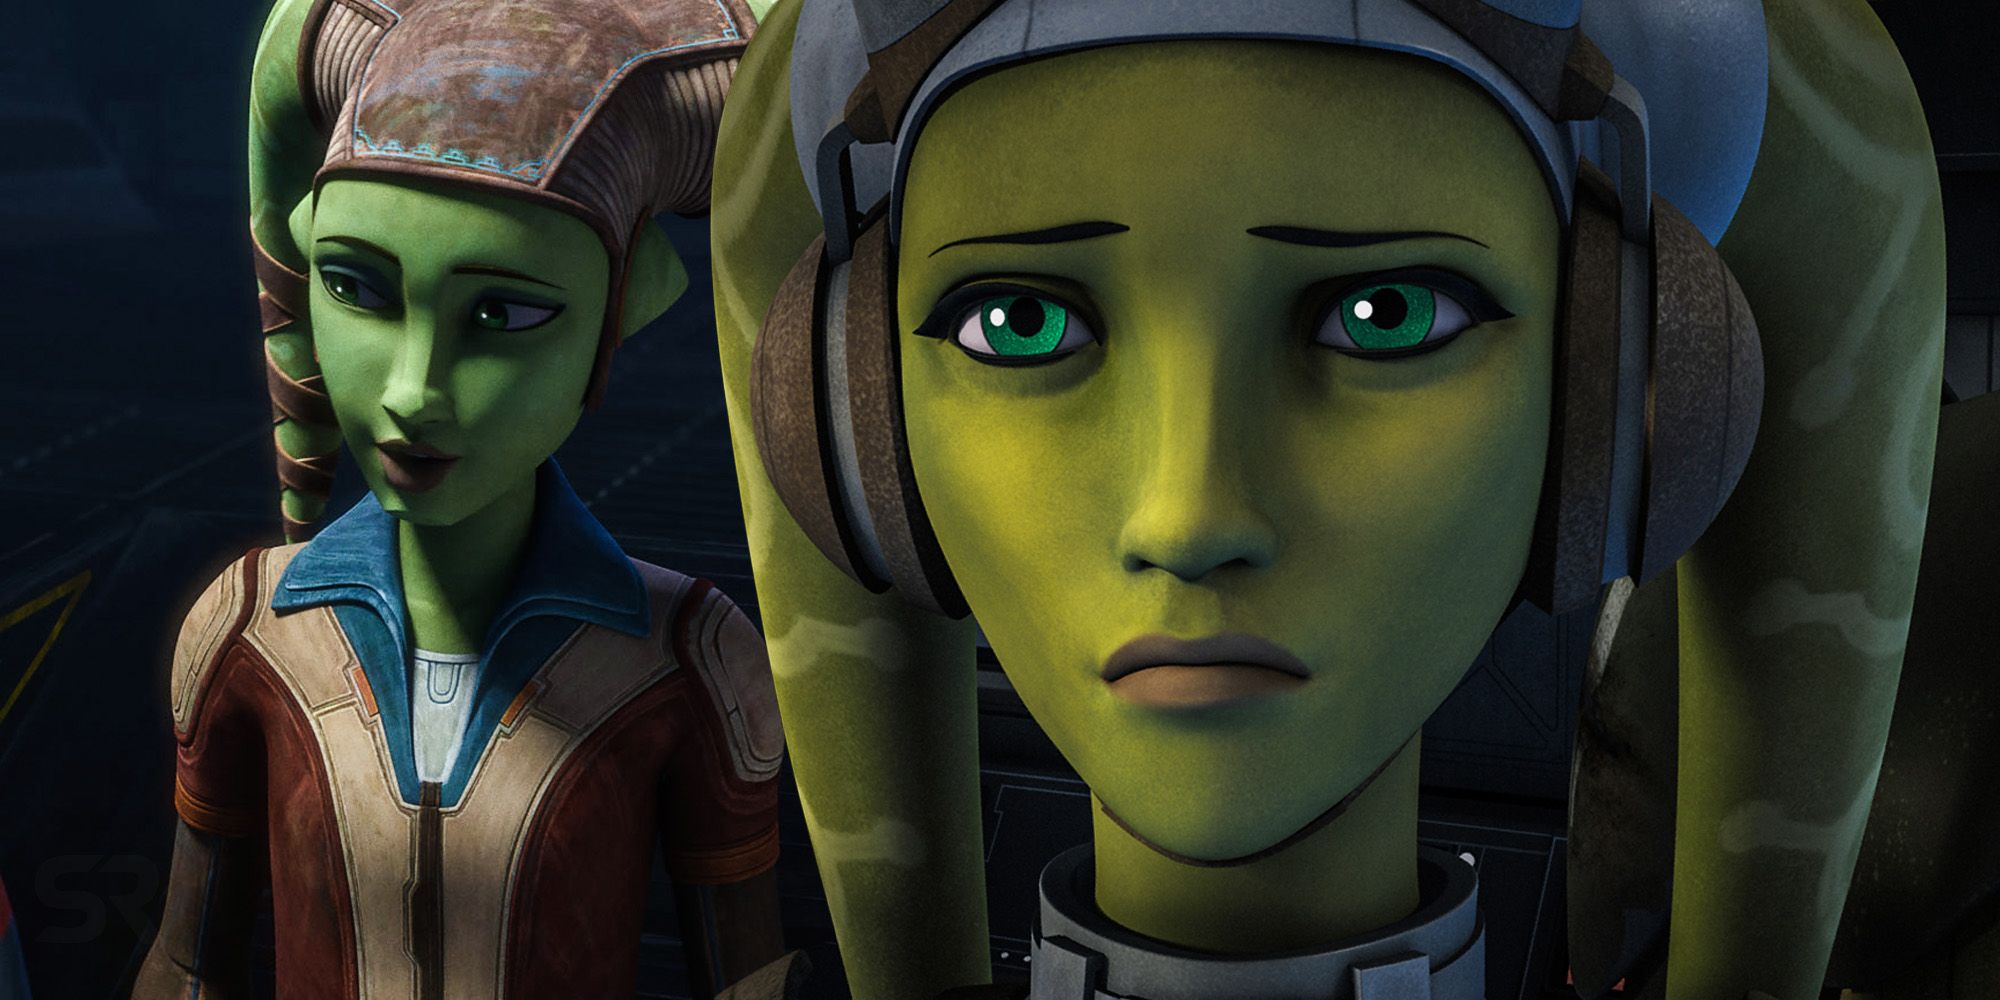 Why Hera's Accent Is So Different In Bad Batch Compared To Rebels.